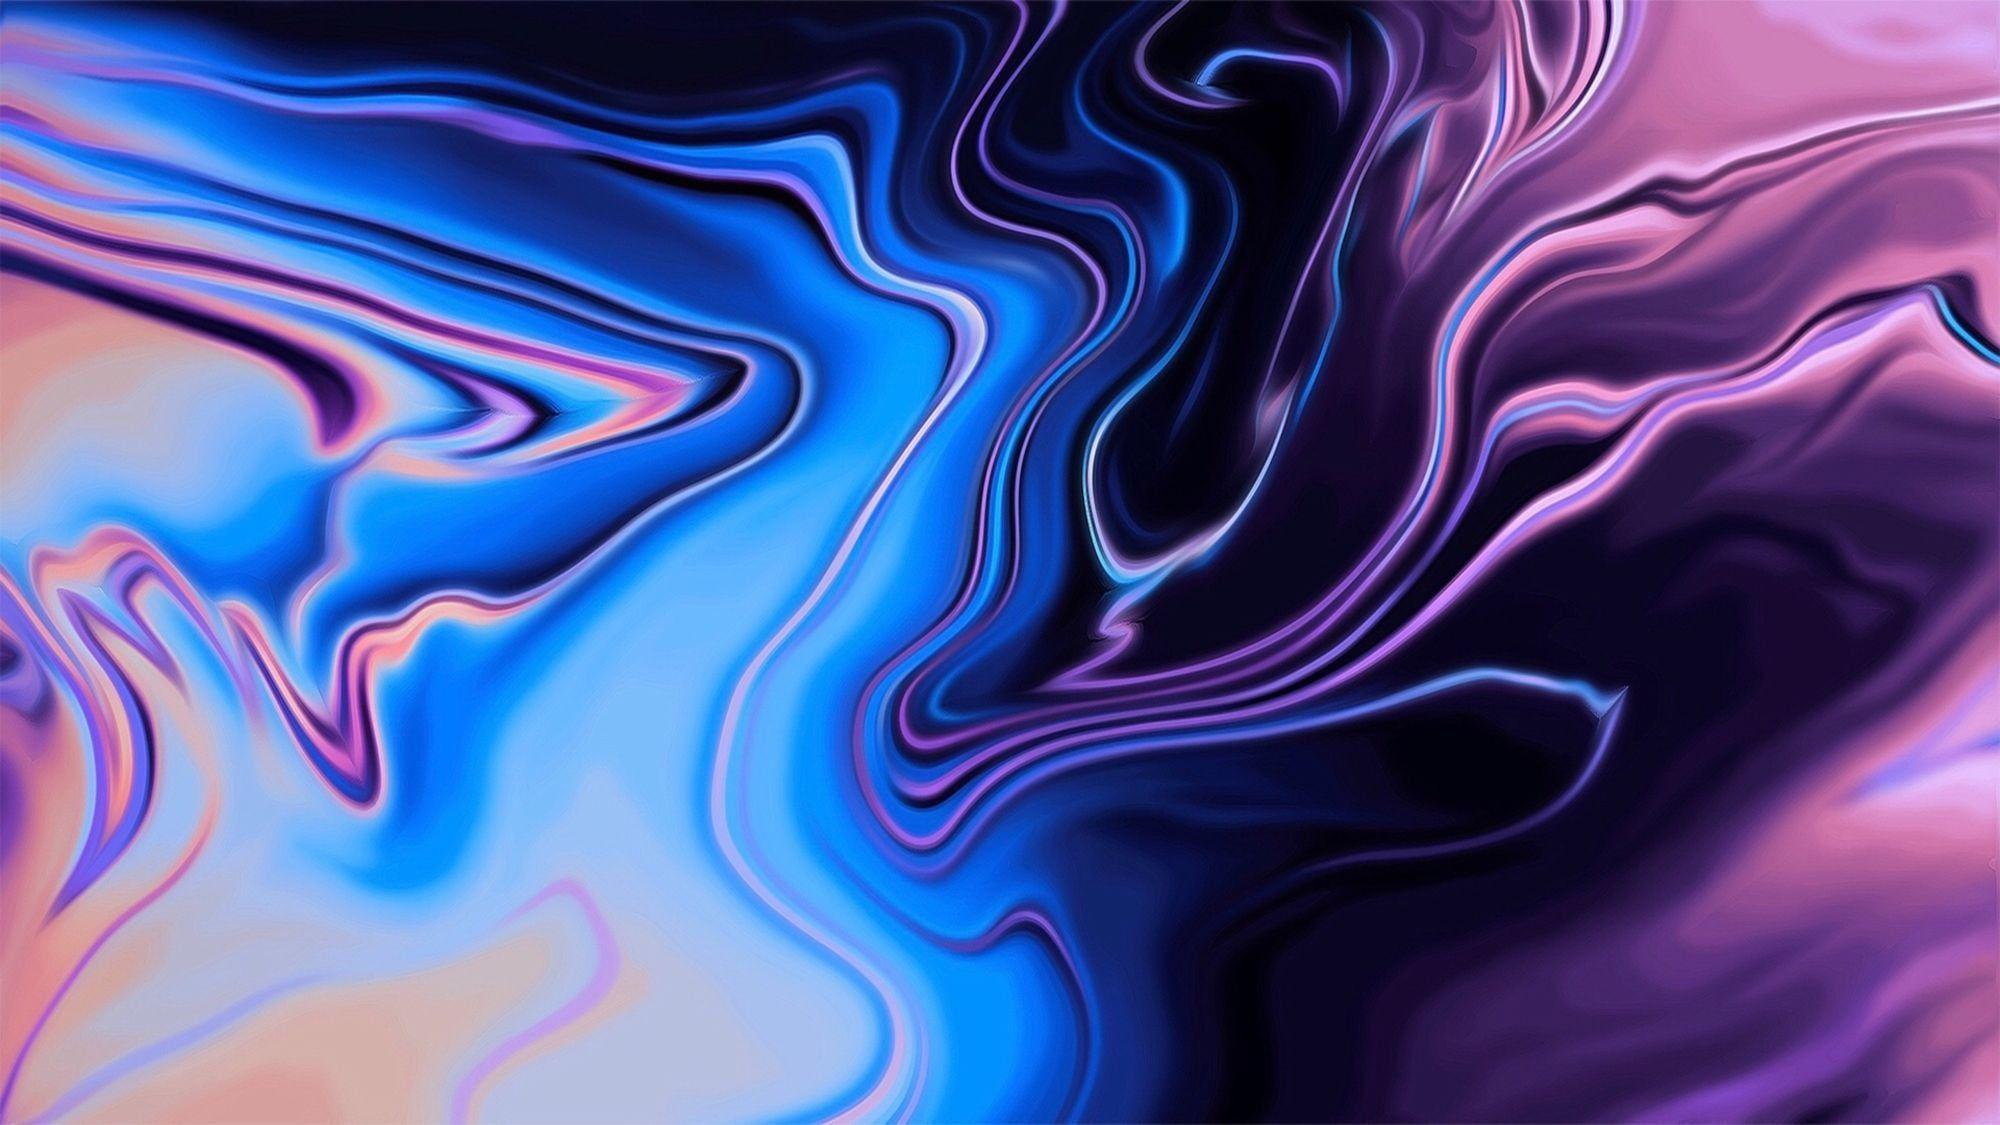 Blue and Purple Abstract Wallpapers - Top Free Blue and Purple Abstract